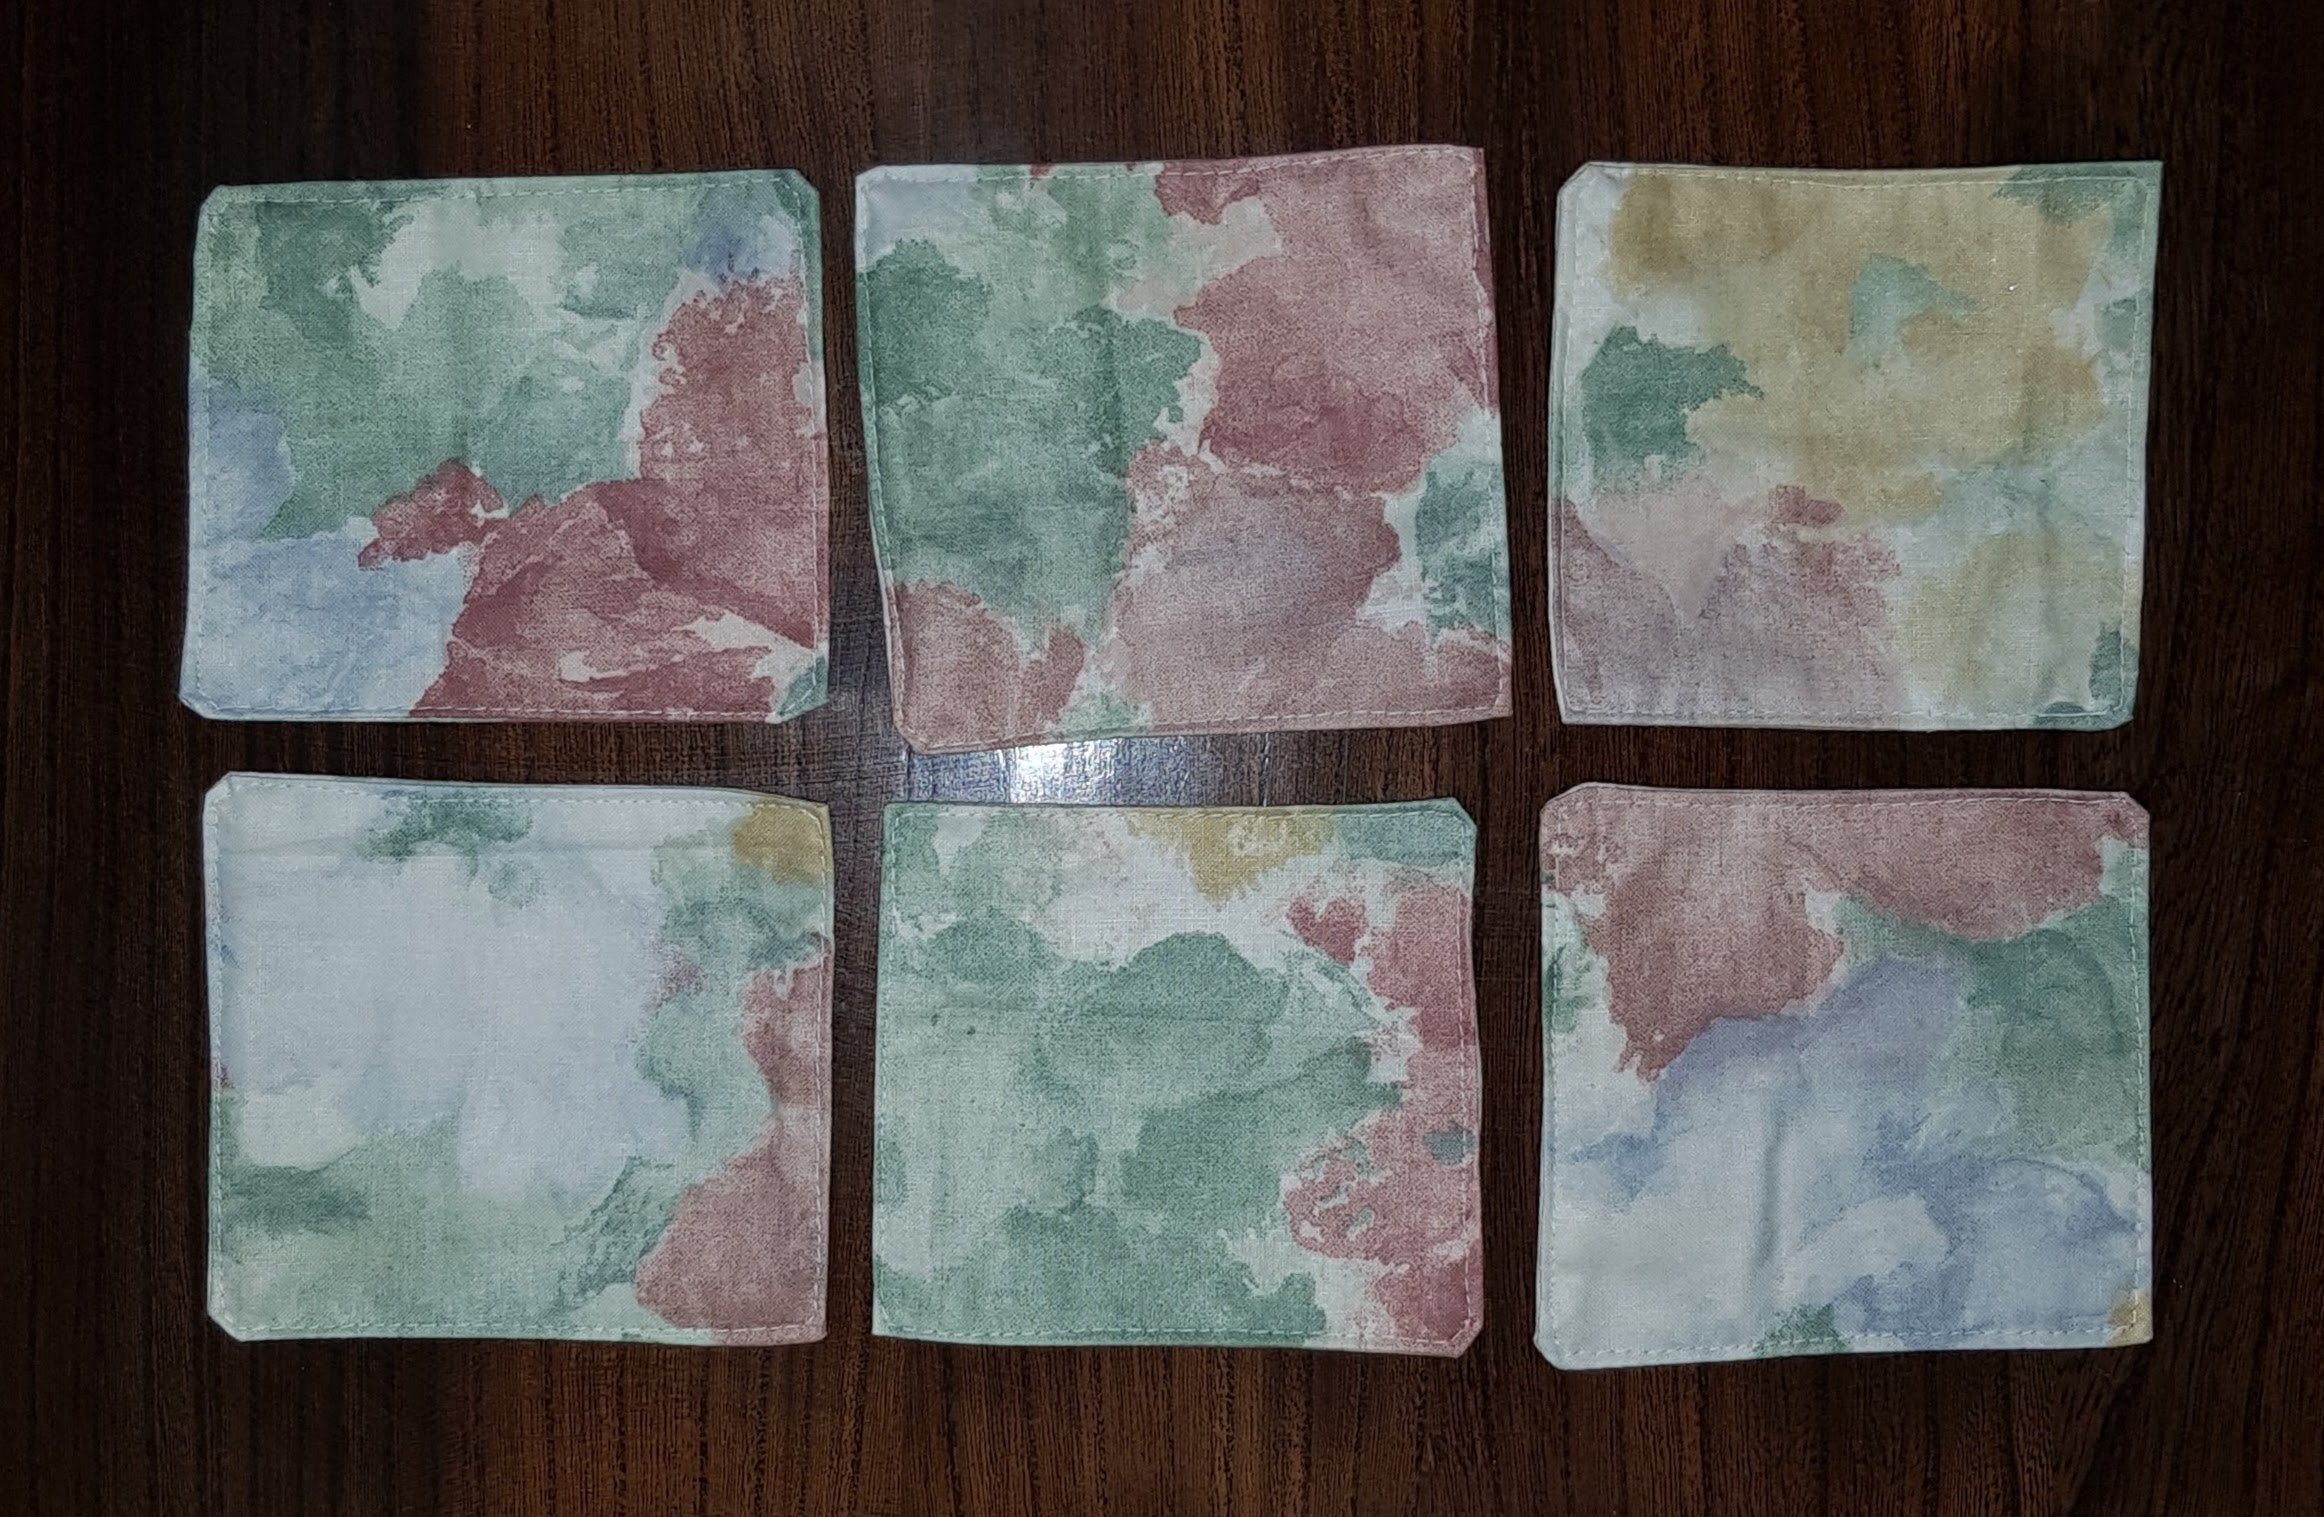 Six fabric coasters sitting on a wooden background. None of the coasters are the same but they have commonalities as they come from the same cloth. The coasters have an off white background with paint-style, matte patches of green, pink, yellow and blue.